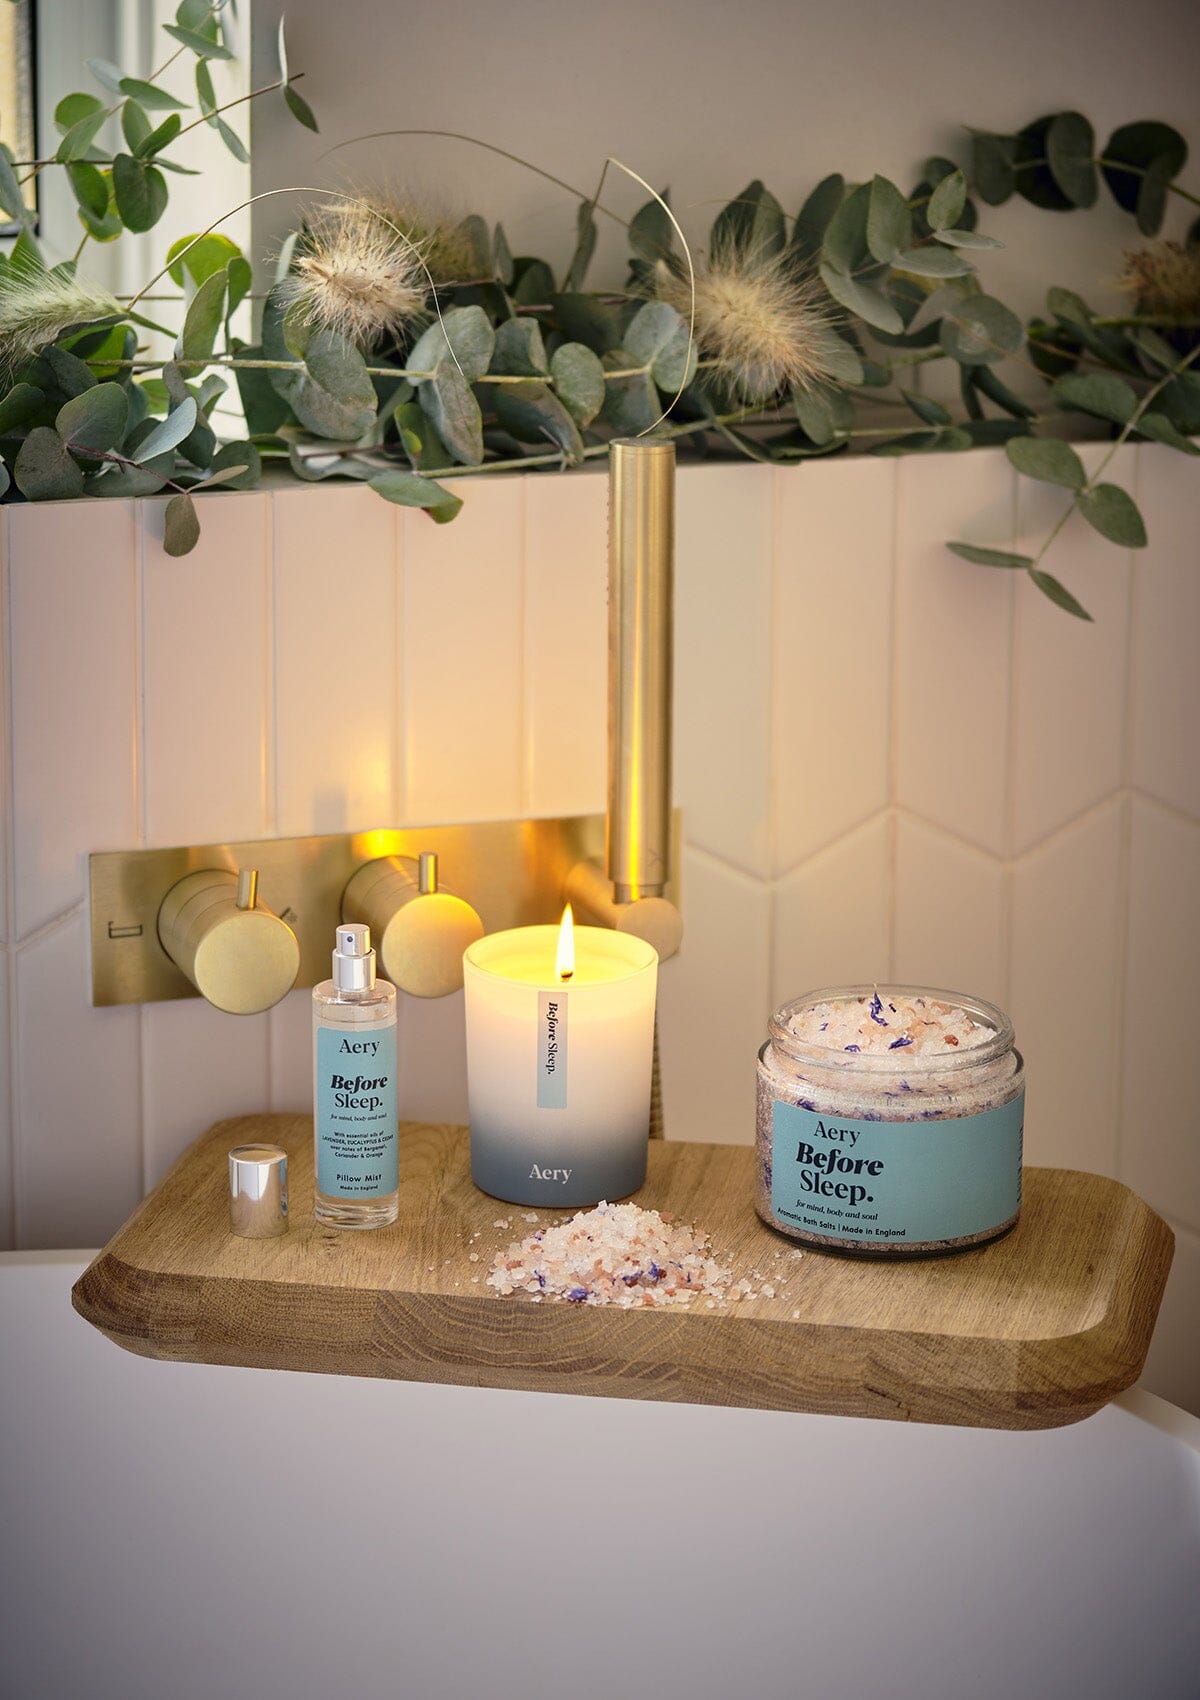 Blue Sleep Before bath salt displayed with Before Sleep pillow mist and candle by Aery placed on wooden tray in bathroom 